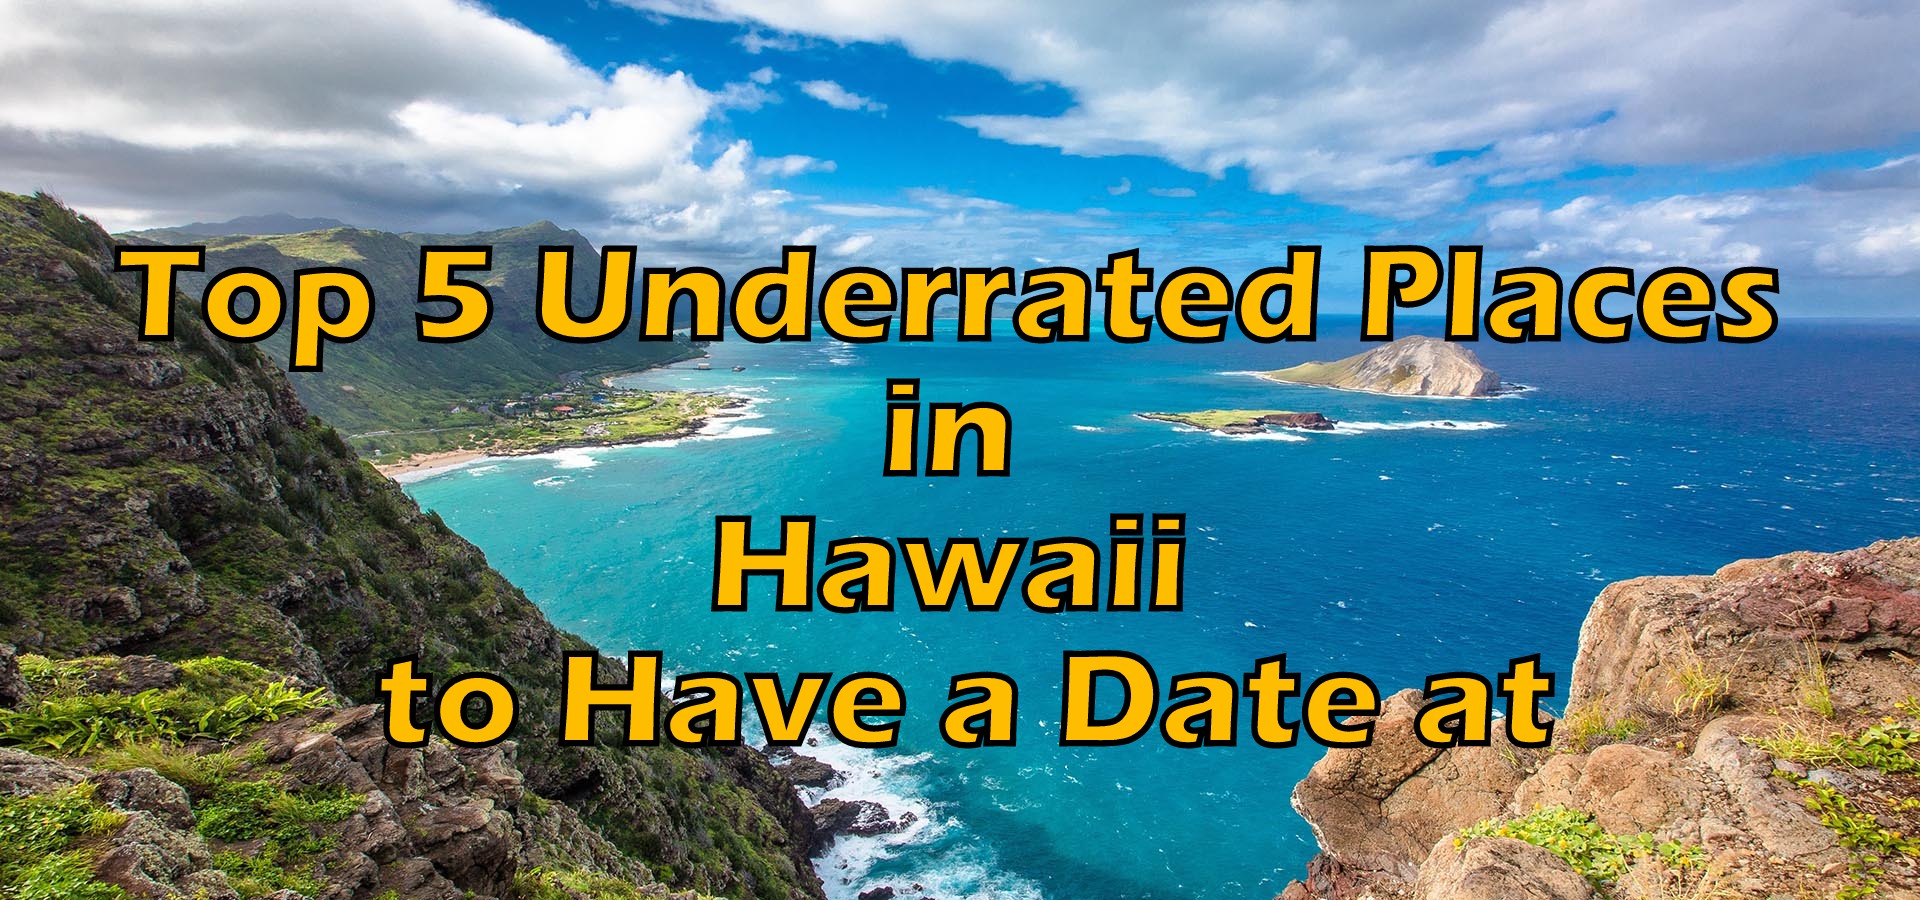 Top 5 Underrated Places in Hawaii to Have a Date at